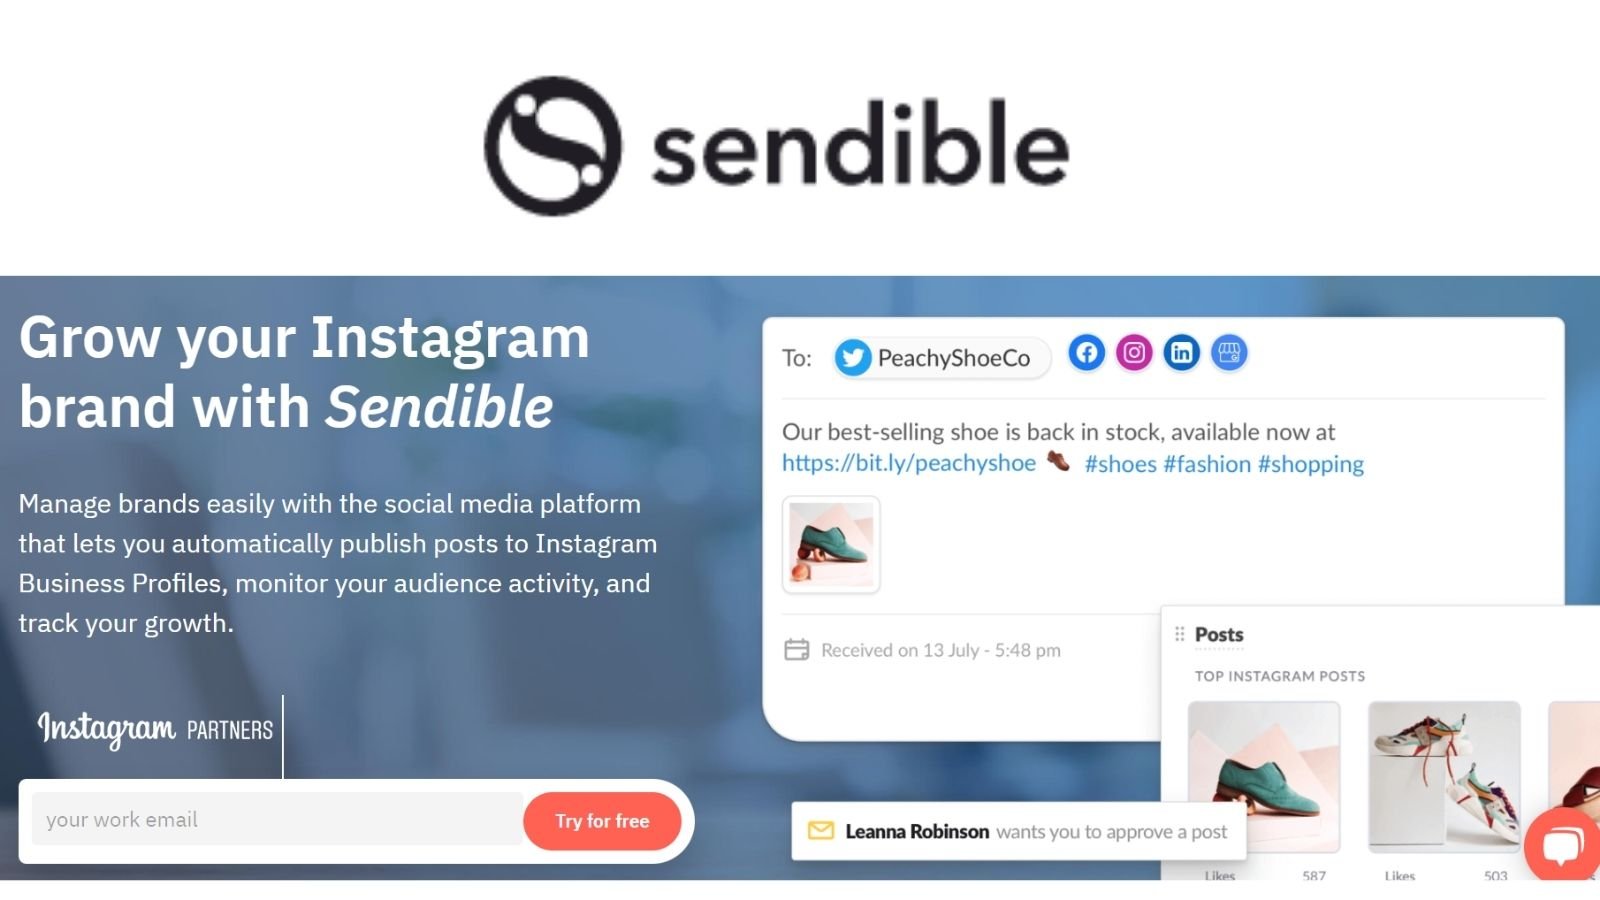 sendible for an Instagram tool must have